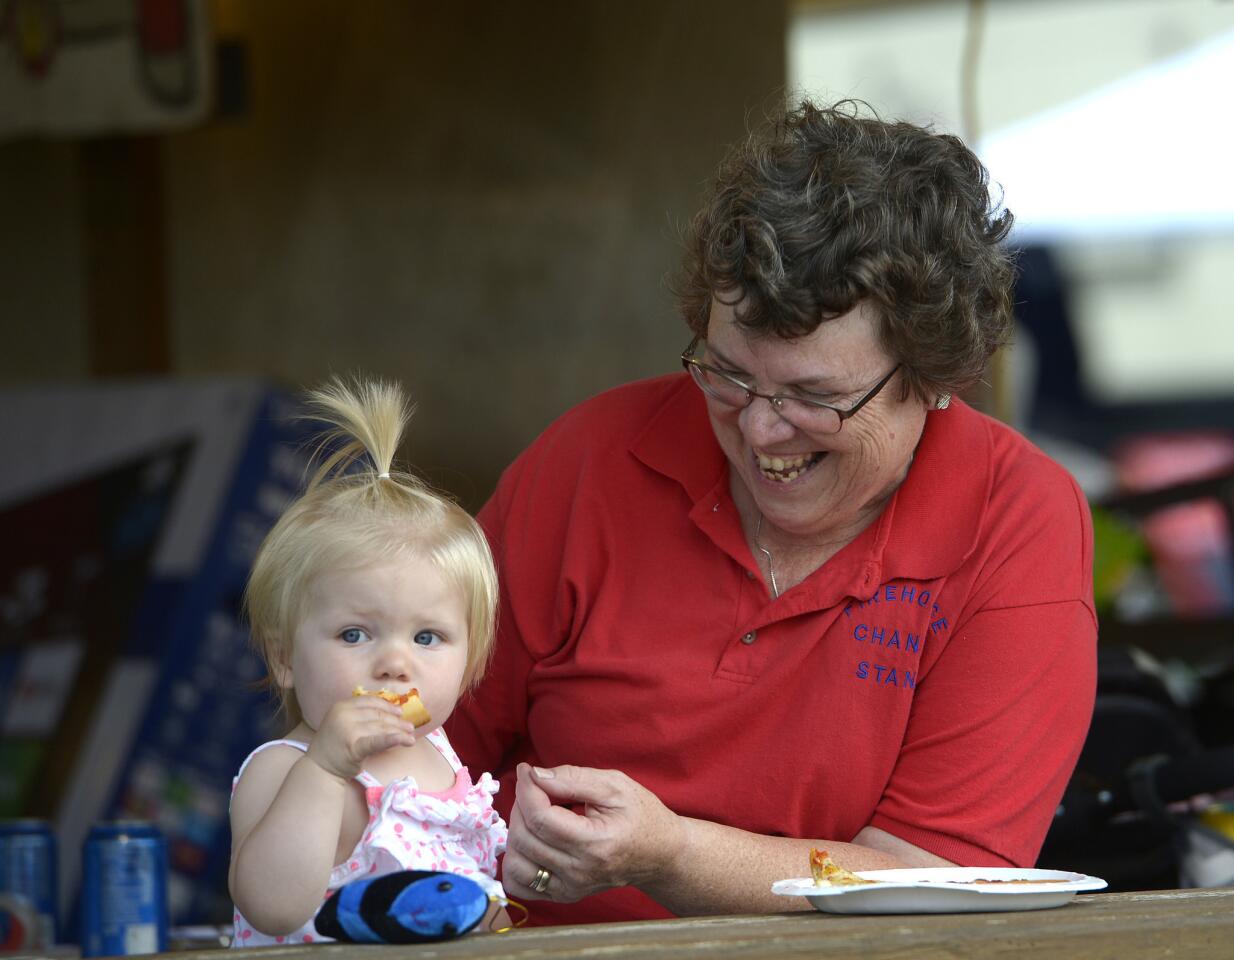 Fire company volunteer Cheryl Keeney shares a slice of pizza with her grandaughter Lucy Keeney, 1, while working a booth at the Union Bridge fire company carnival May 28.